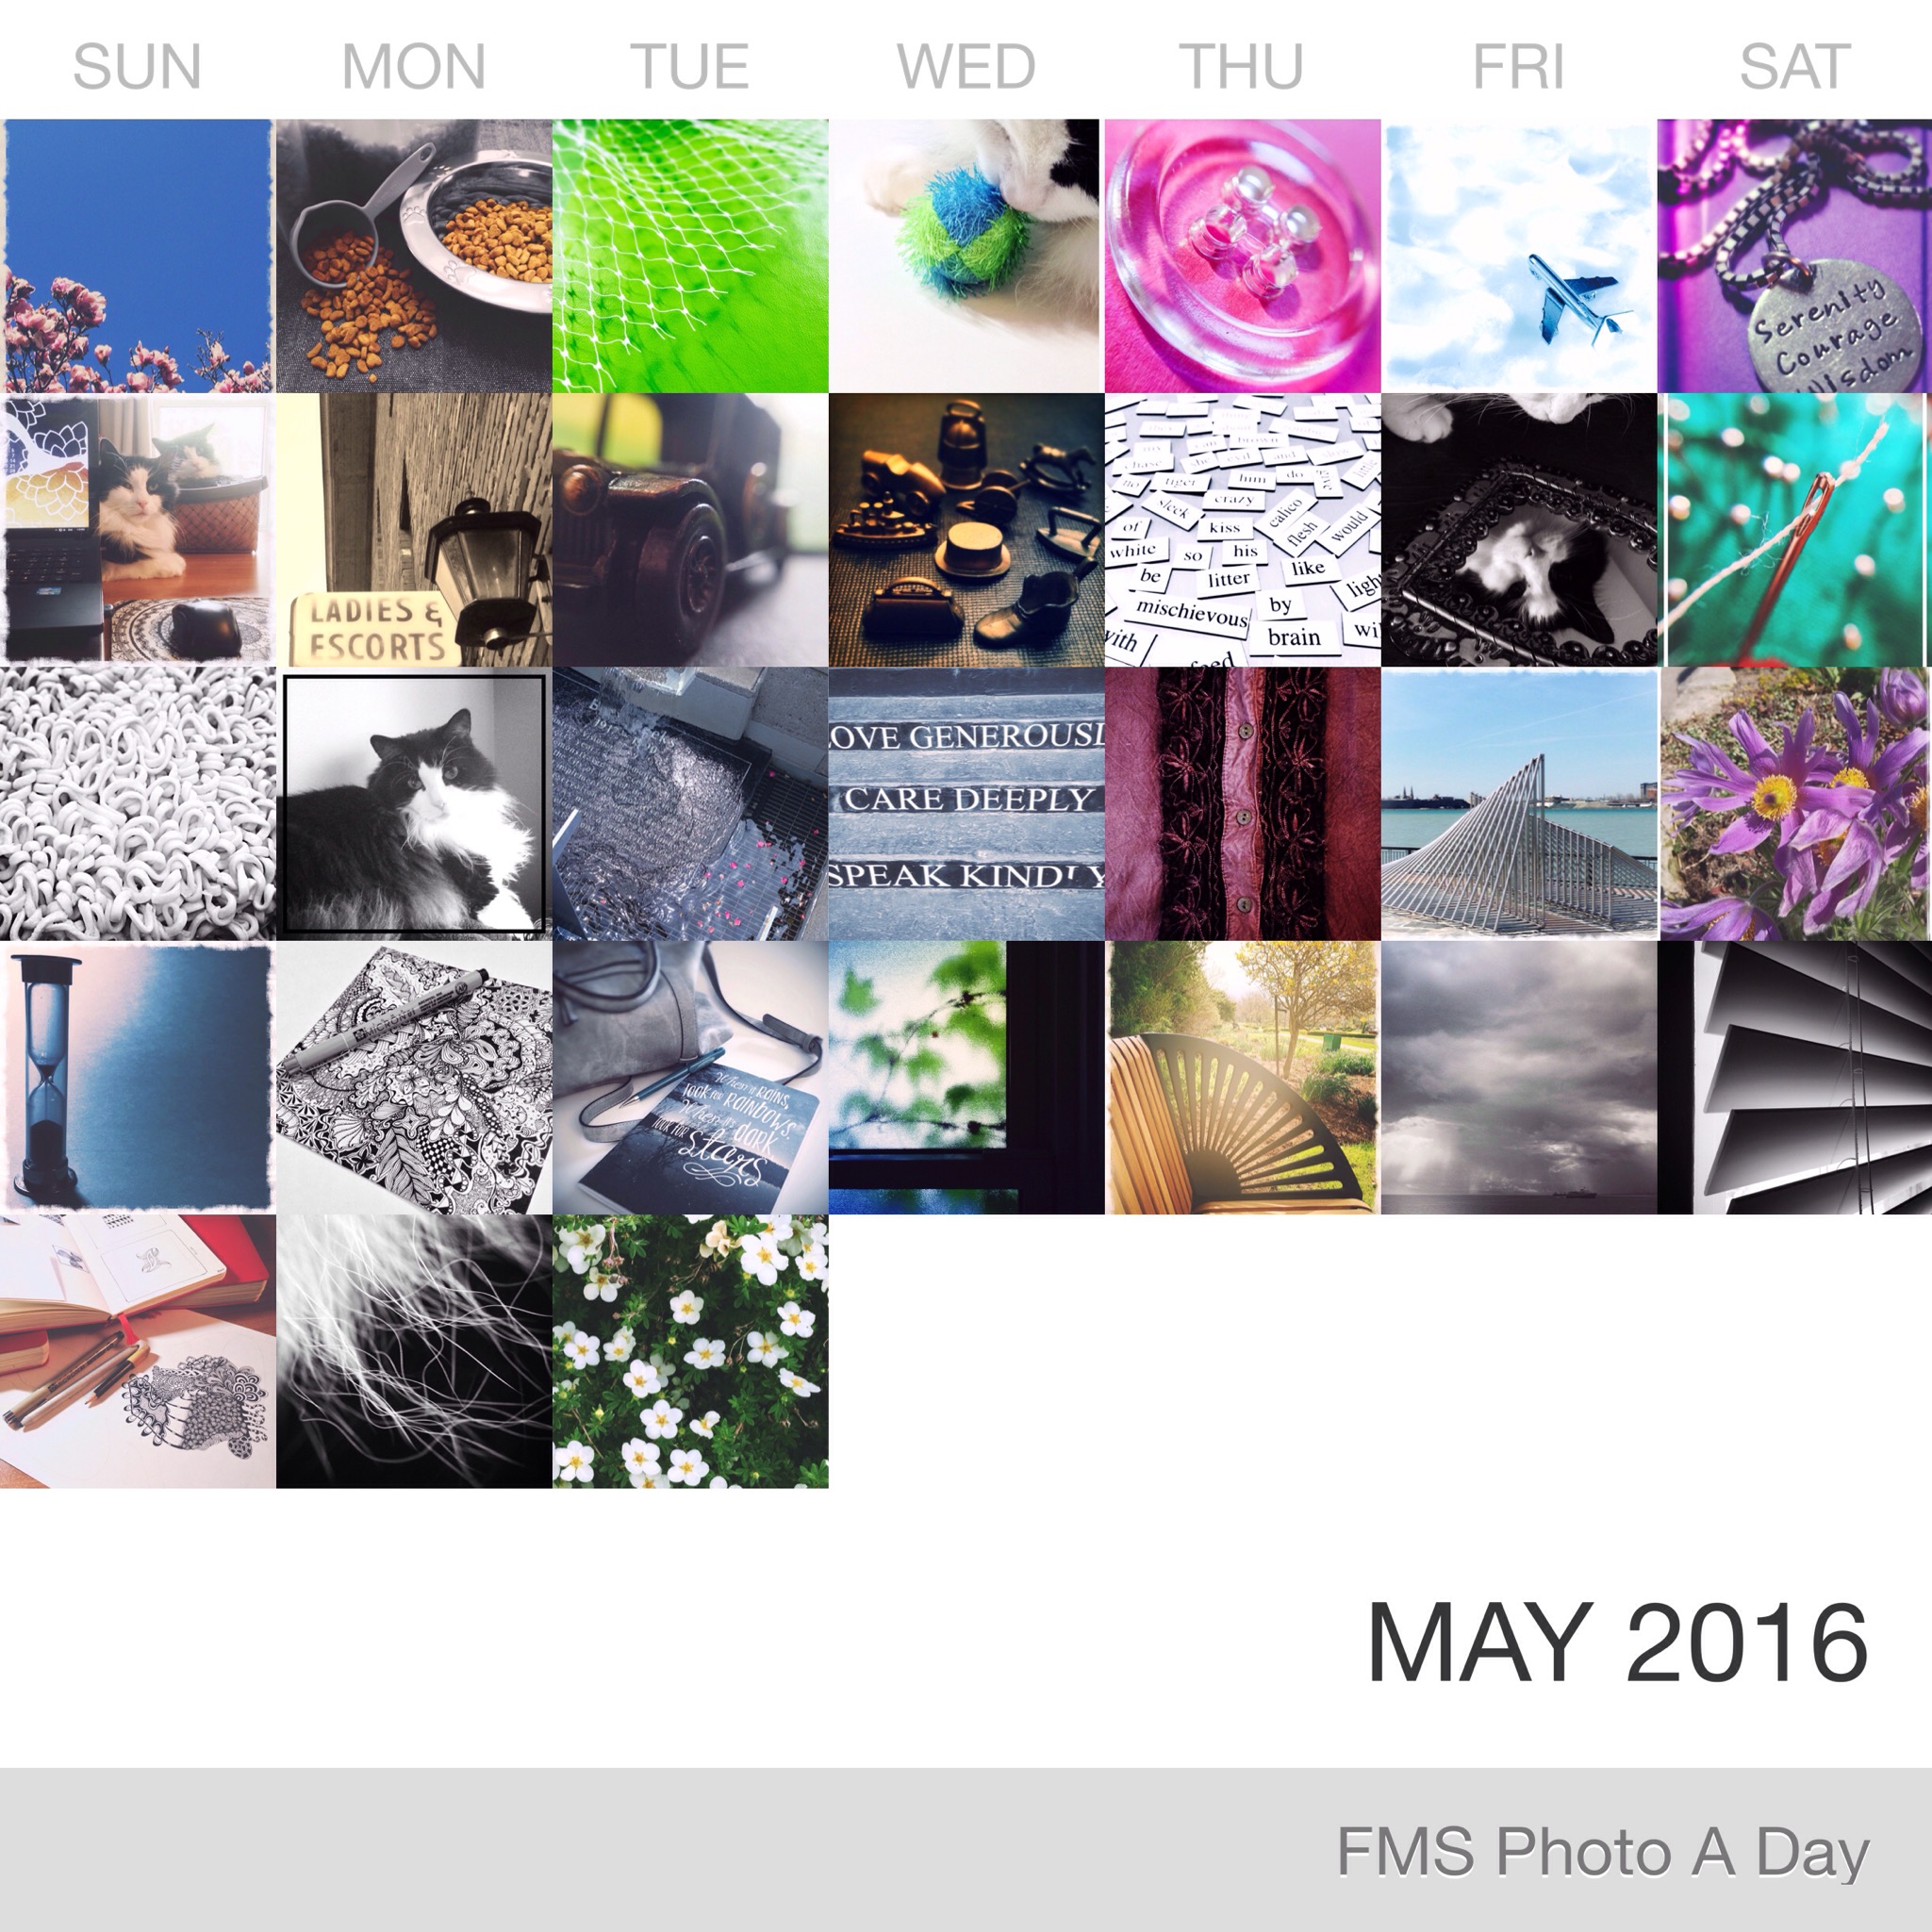 FMS Photo A Day May 2016